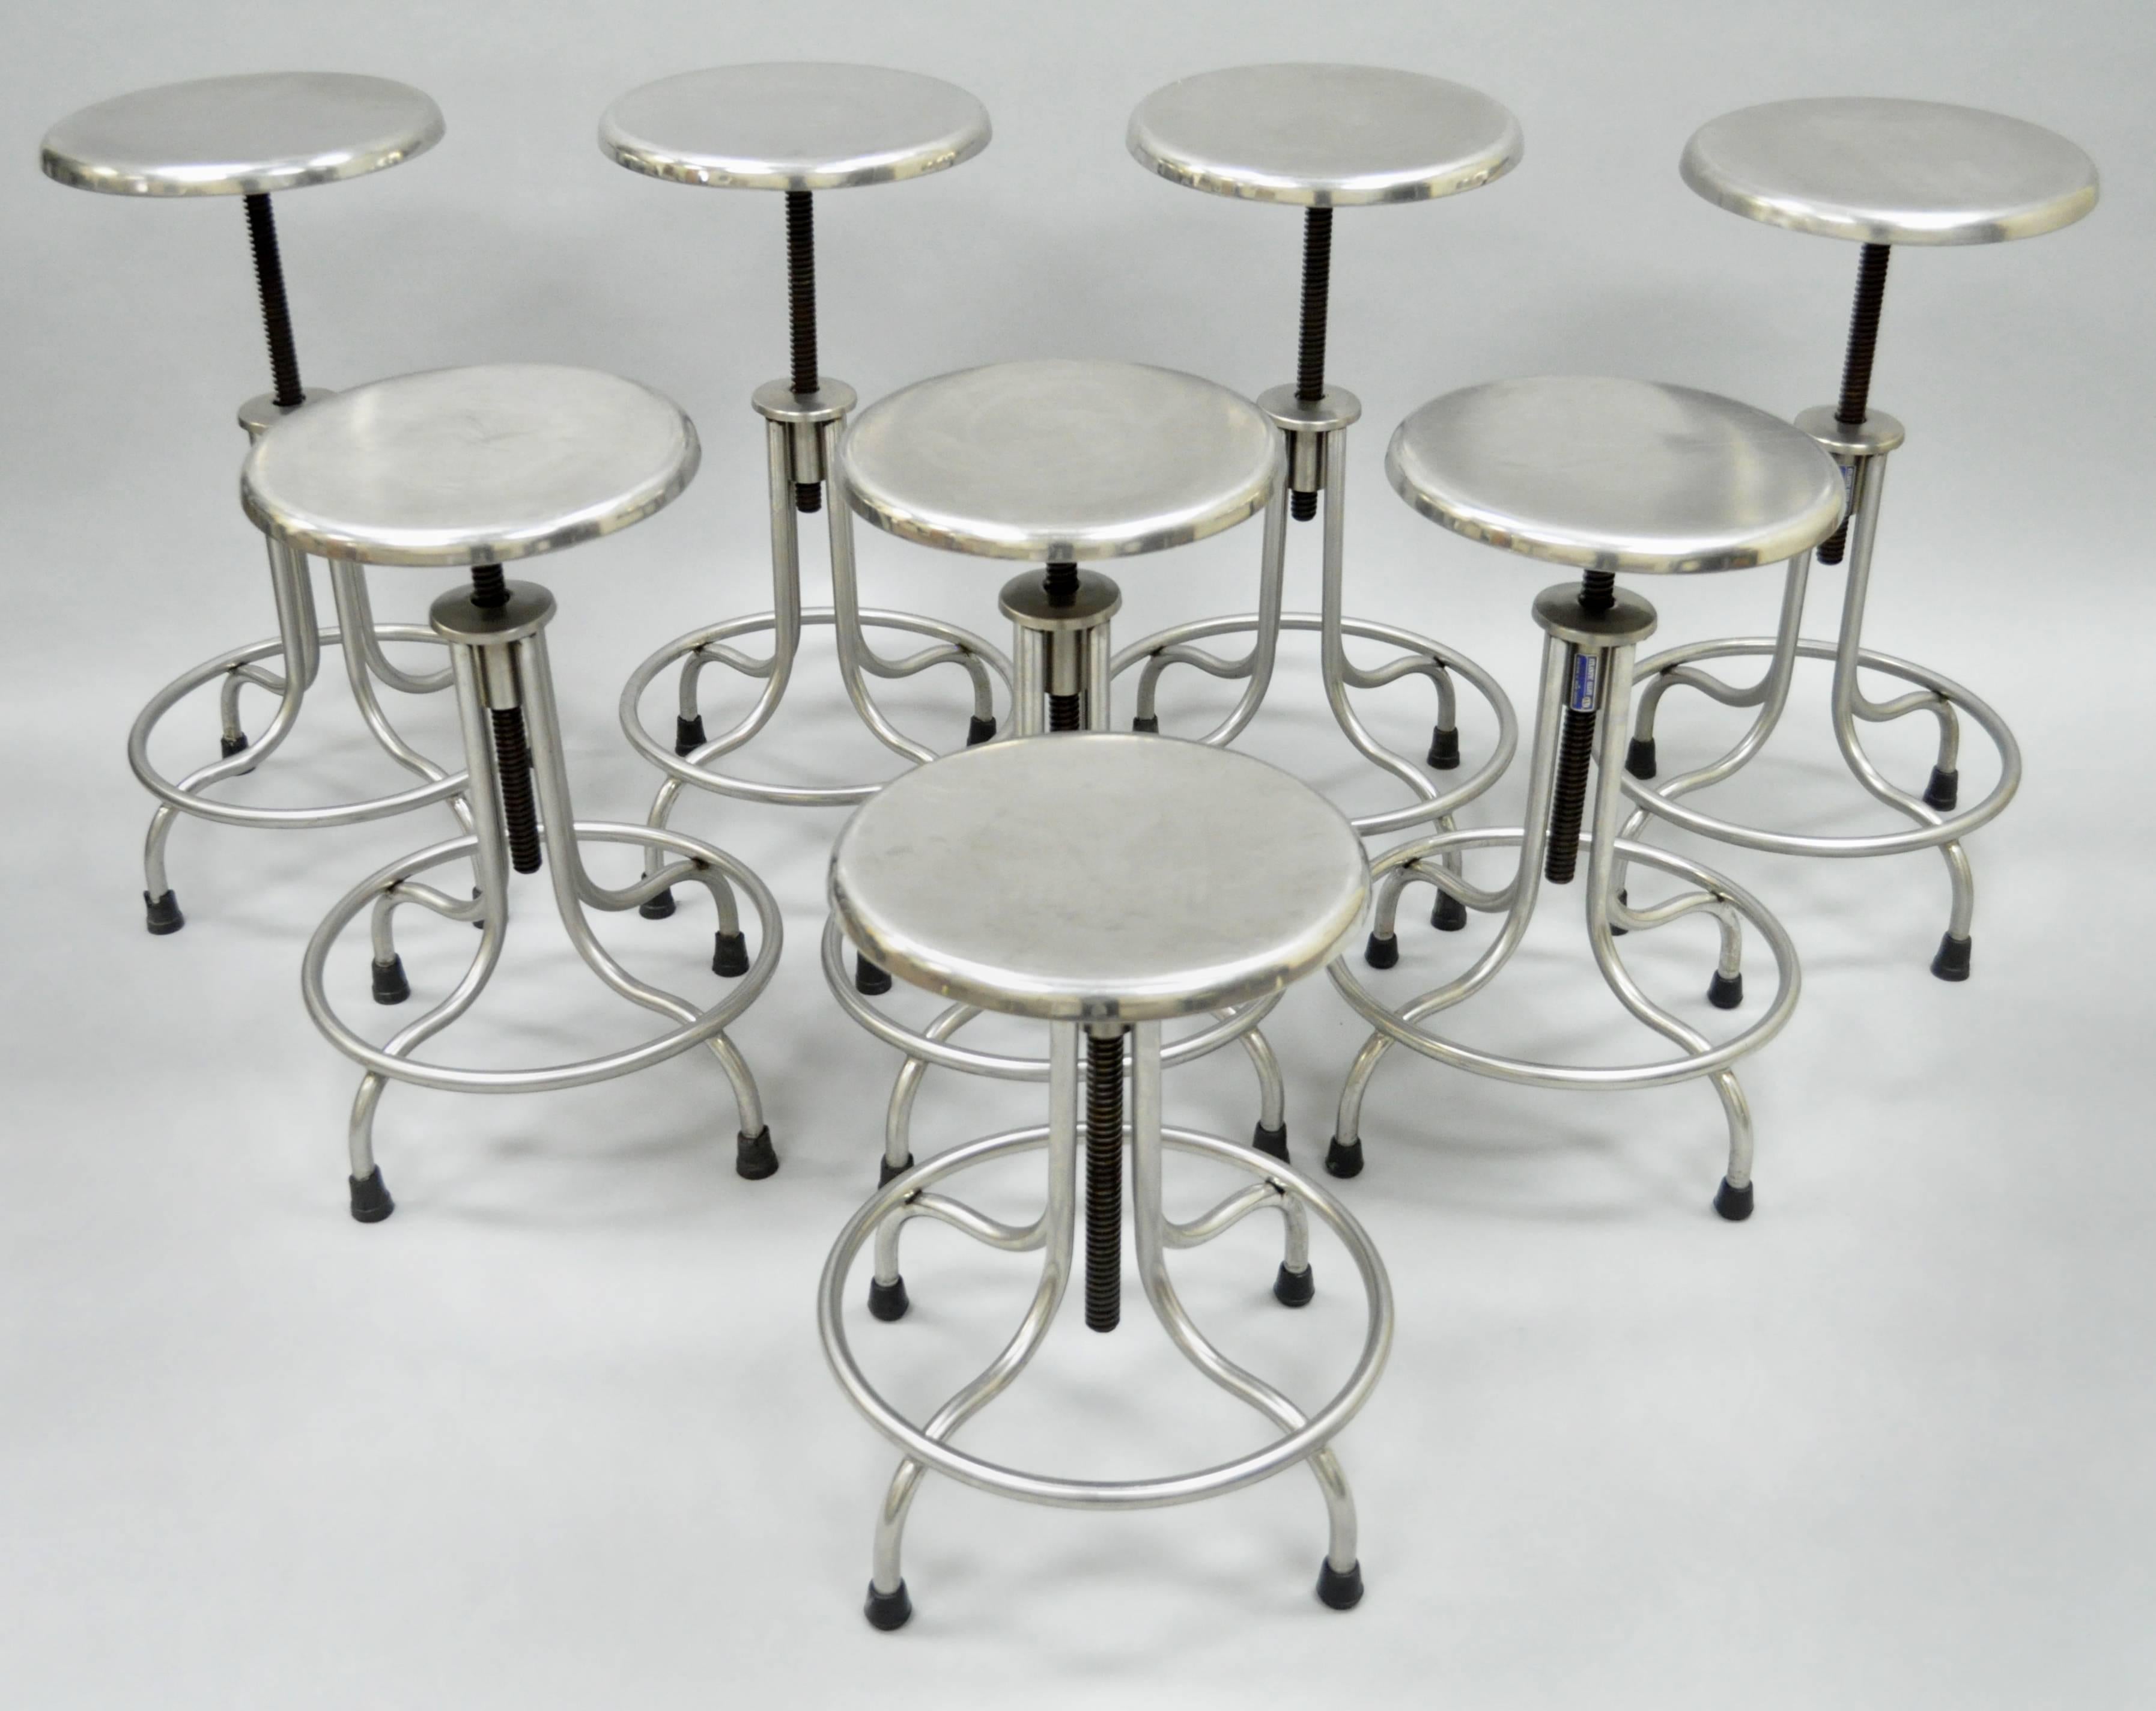 Original vintage stainless steel swivel adjustable height stool or bar stool with footrest by Atlantic Alloy Industries Inc. (AAI) of Union, New Jersey. This well-constructed American made medical or dental stool features a polished solid steel